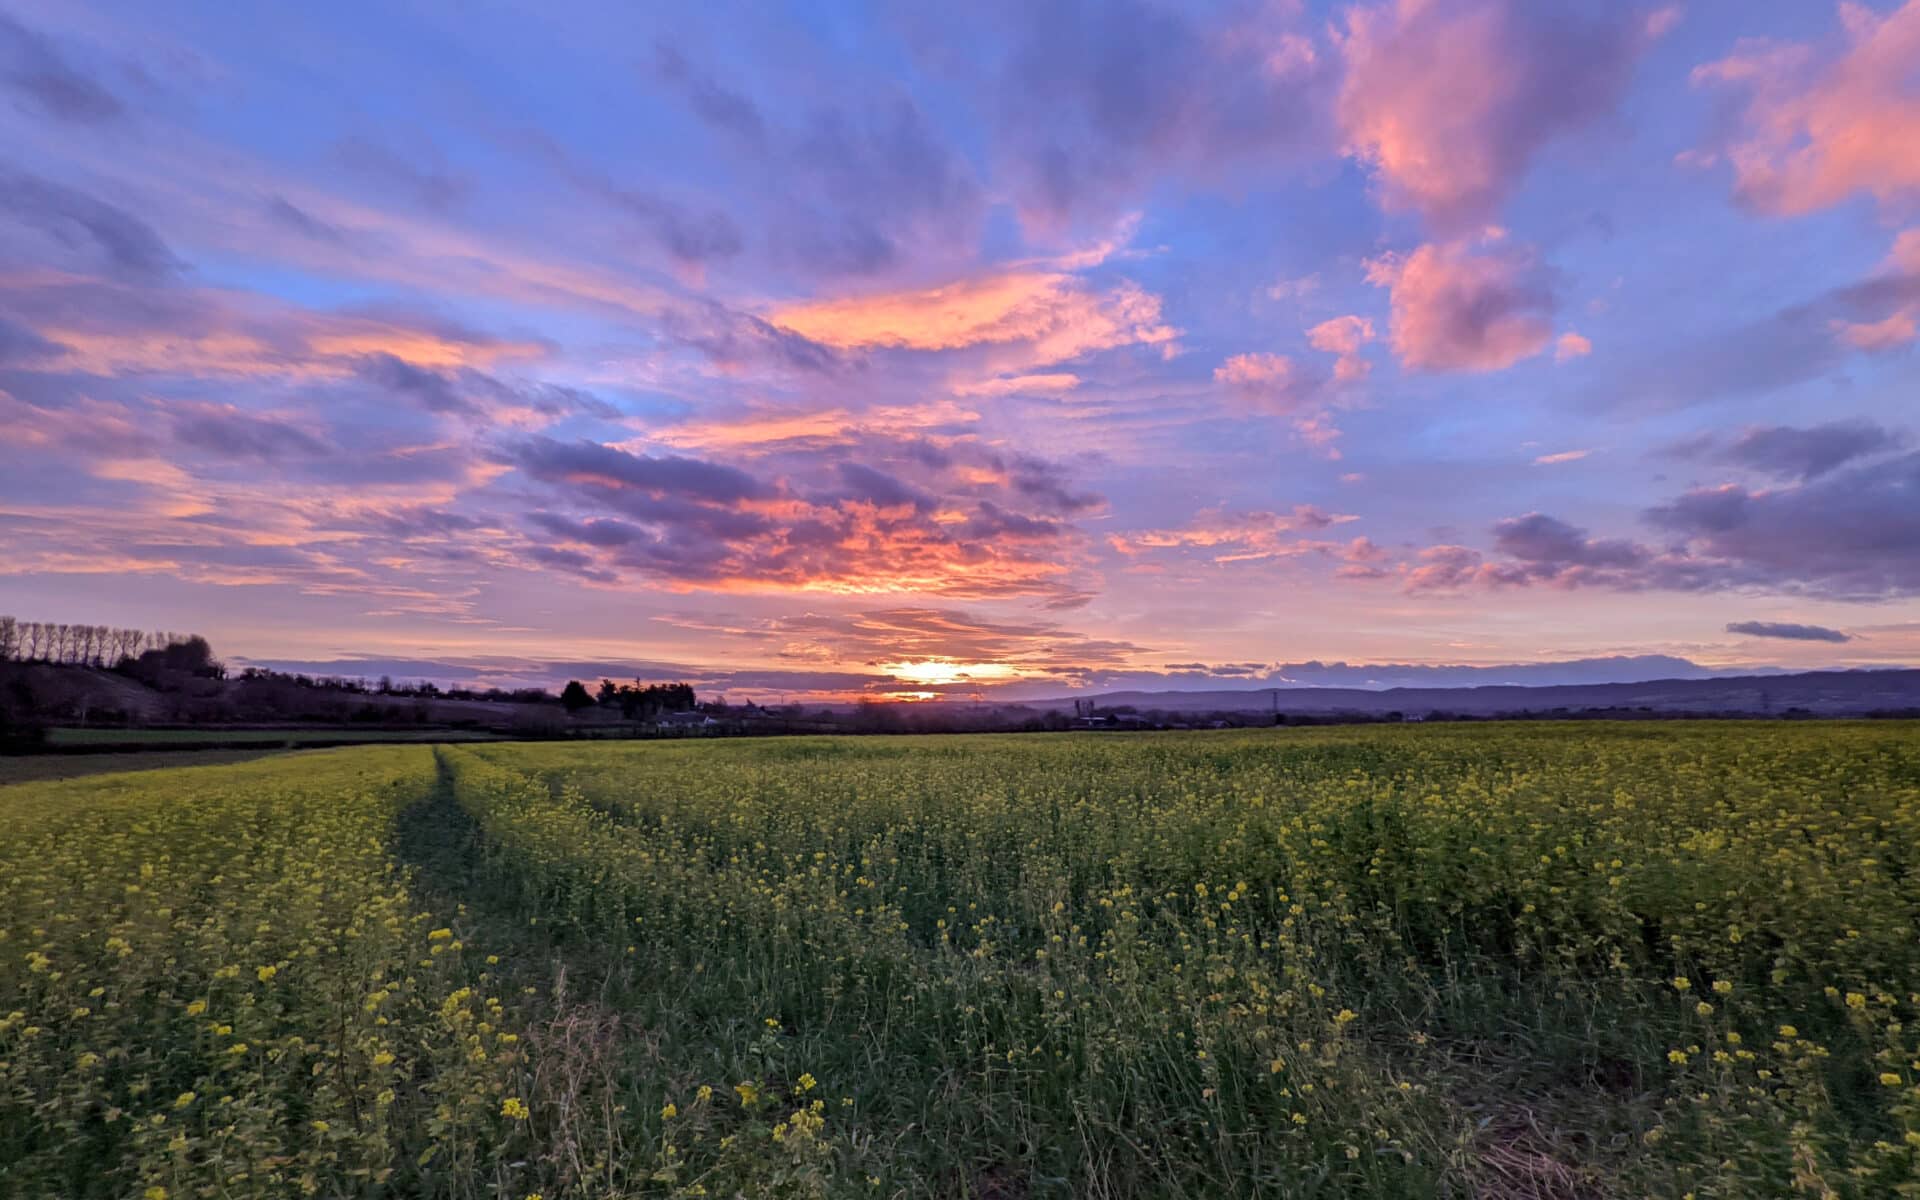 A colourful sunrise over a field of yellow flowers